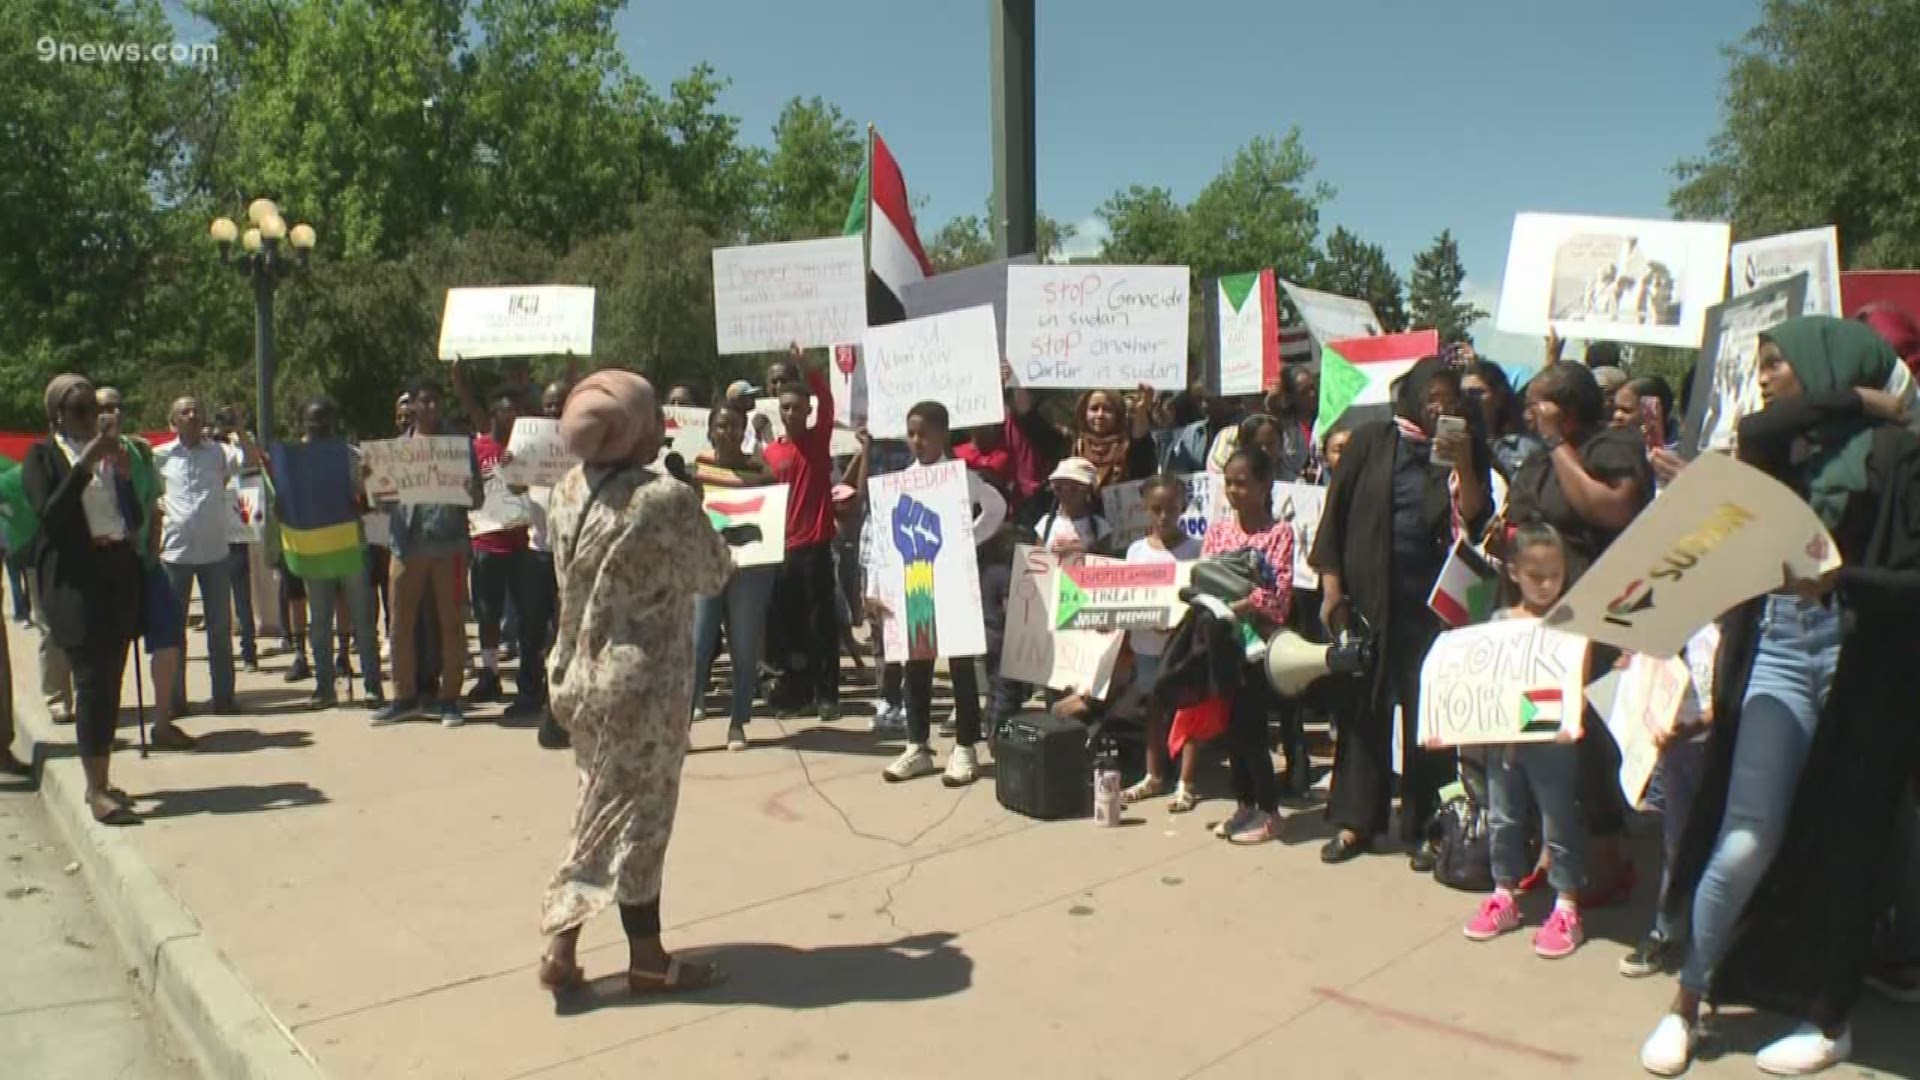 "We are the people of Sudan," chanted dozens of people in Denver's Civic Center Park.